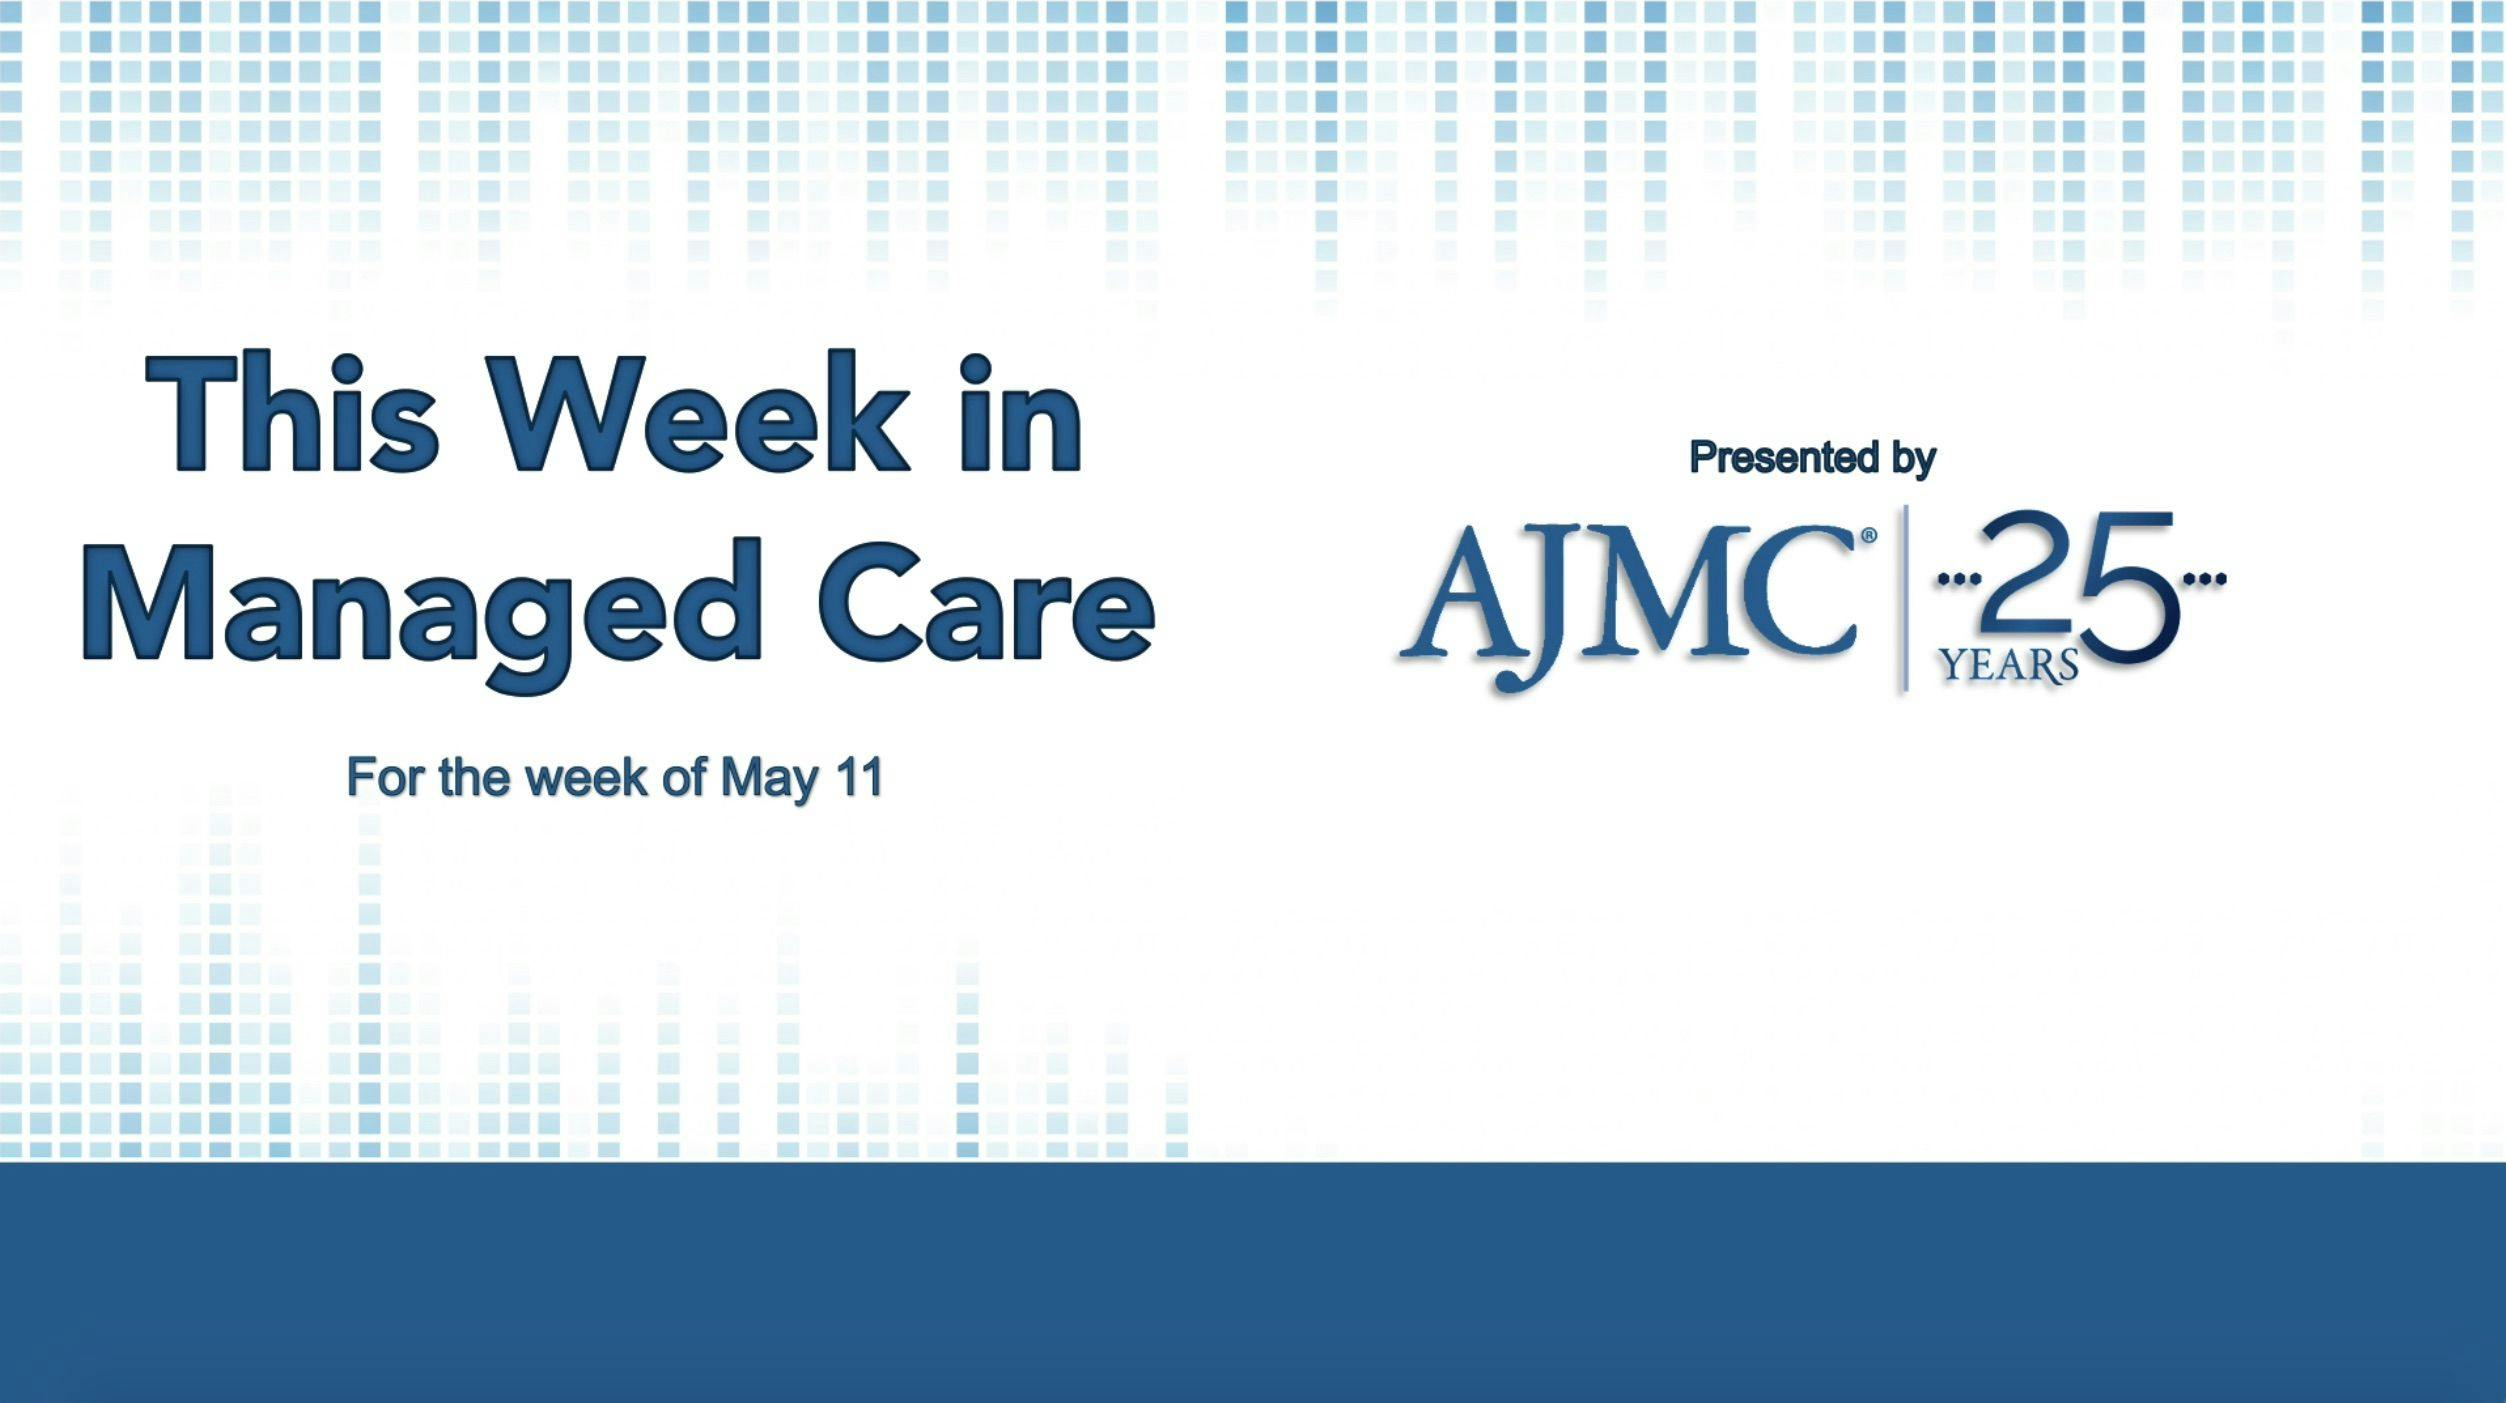 This Week in Managed Care: May 15, 2020